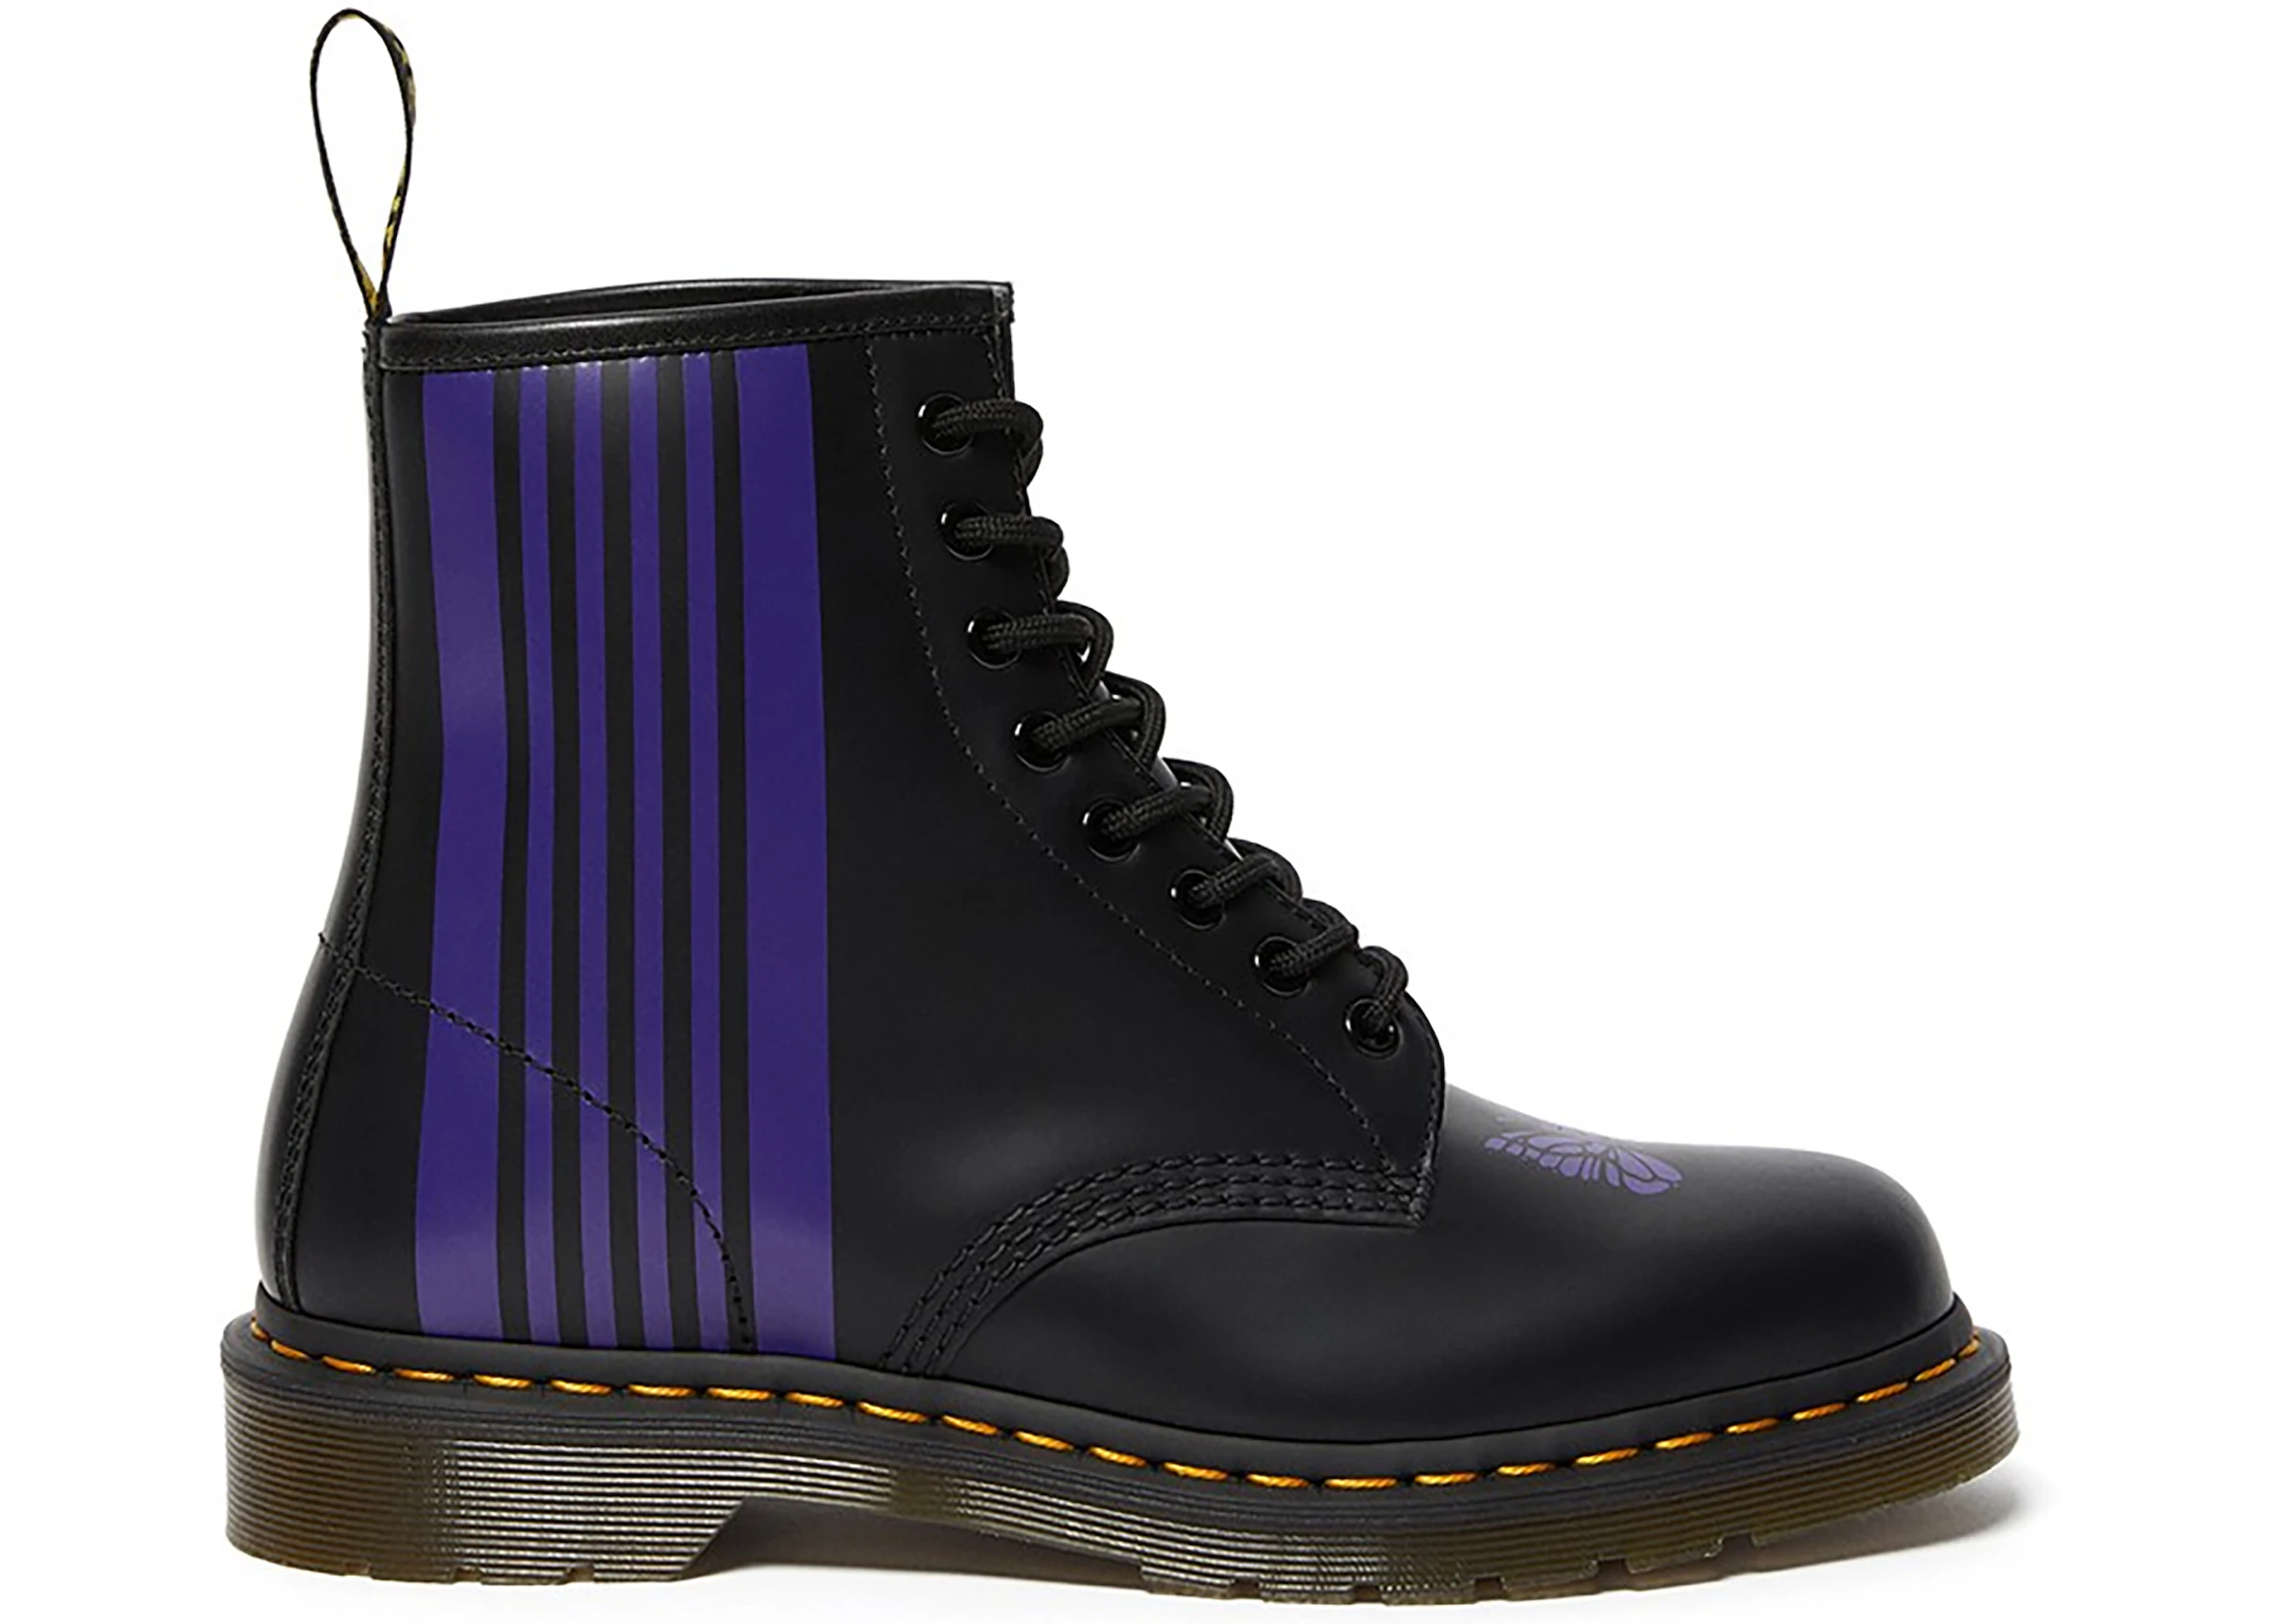 Dr. Martens Boots & New -